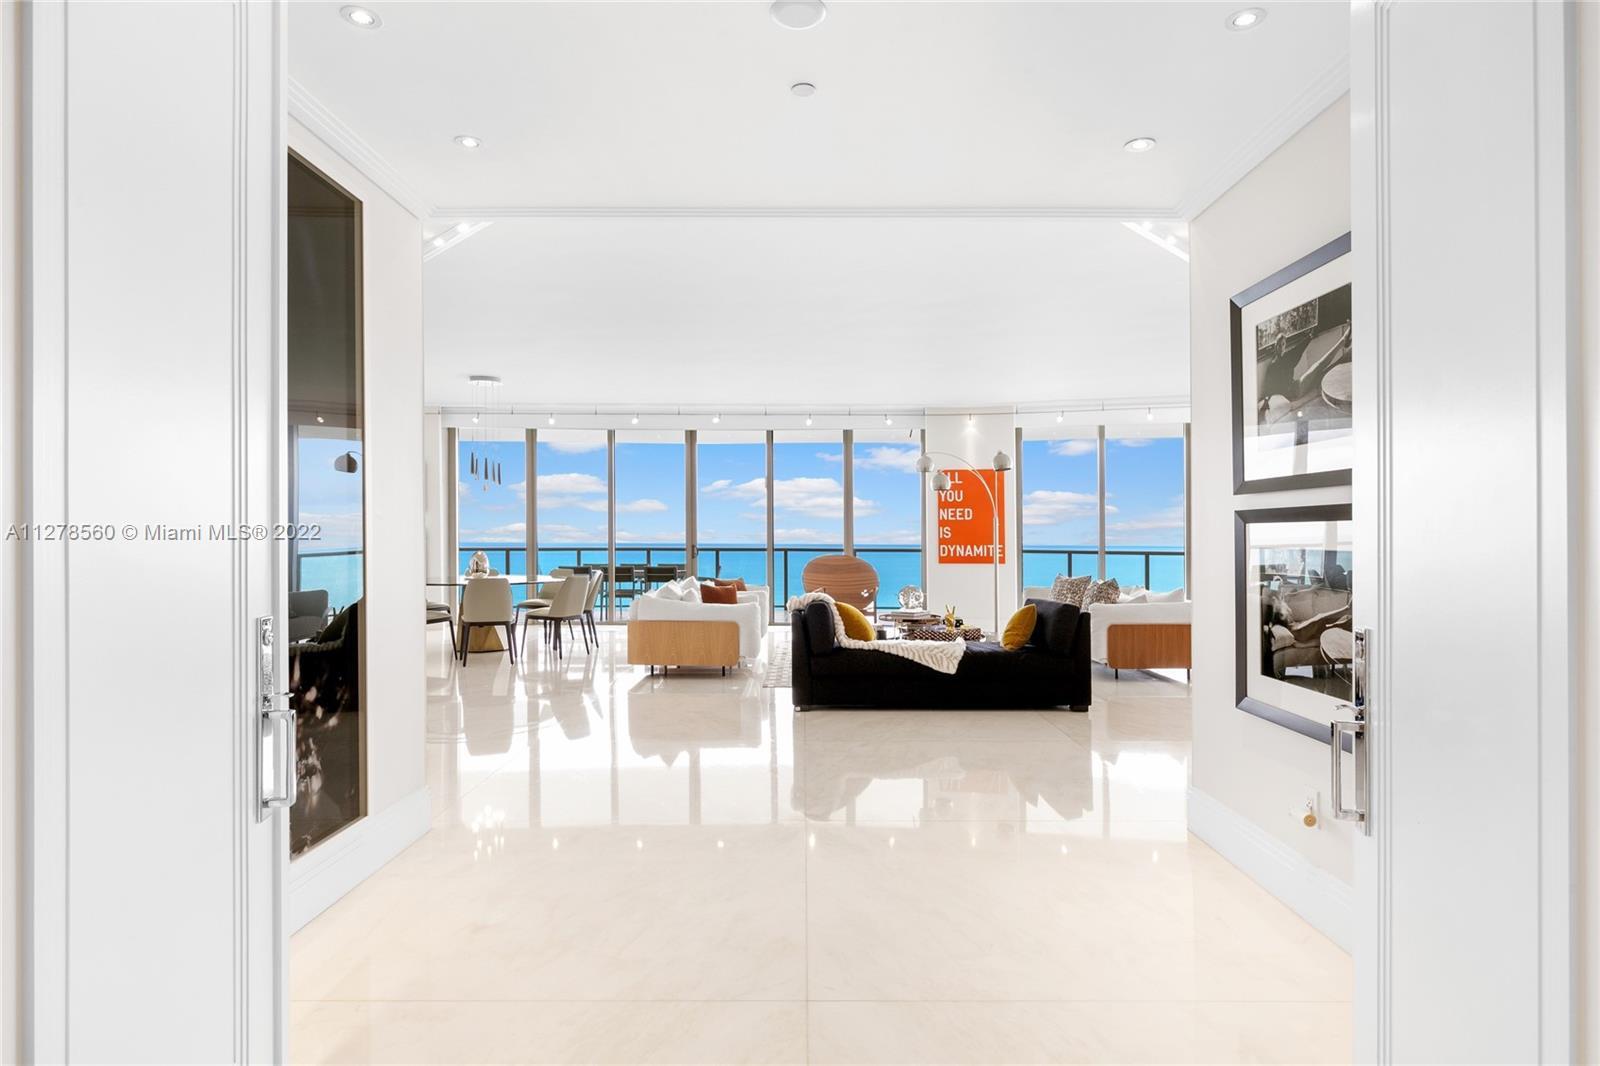 Welcome to the St. Regis Residences located in the most exclusive city in south Florida, Bal Harbour